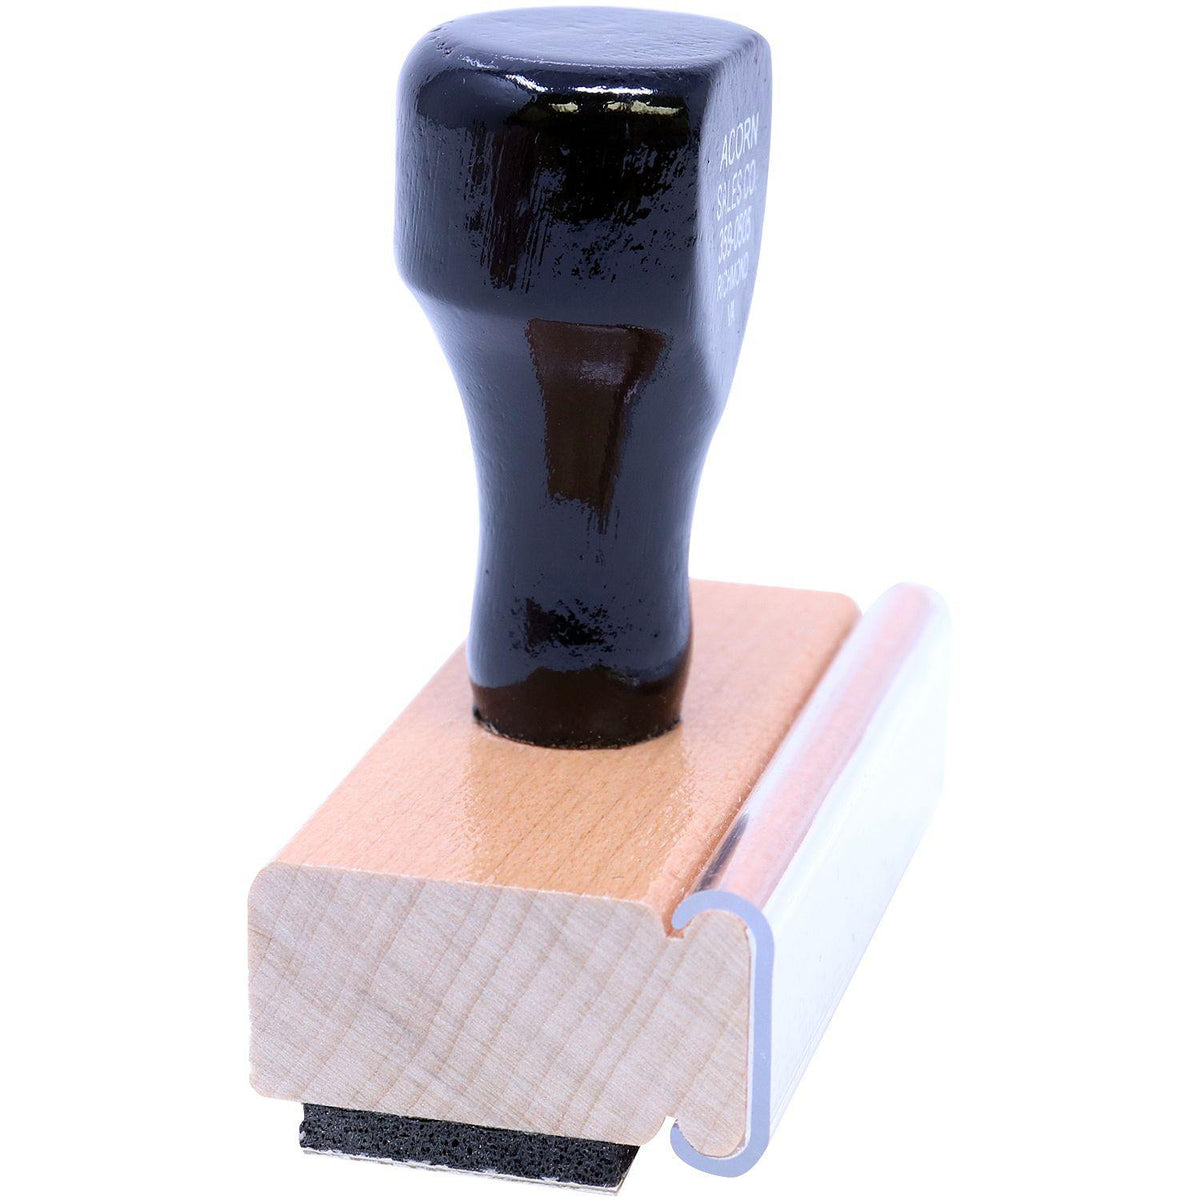 Living Will Rubber Stamp - Engineer Seal Stamps - Brand_Acorn, Impression Size_Small, Stamp Type_Regular Stamp, Type of Use_Legal, Type of Use_Medical Office